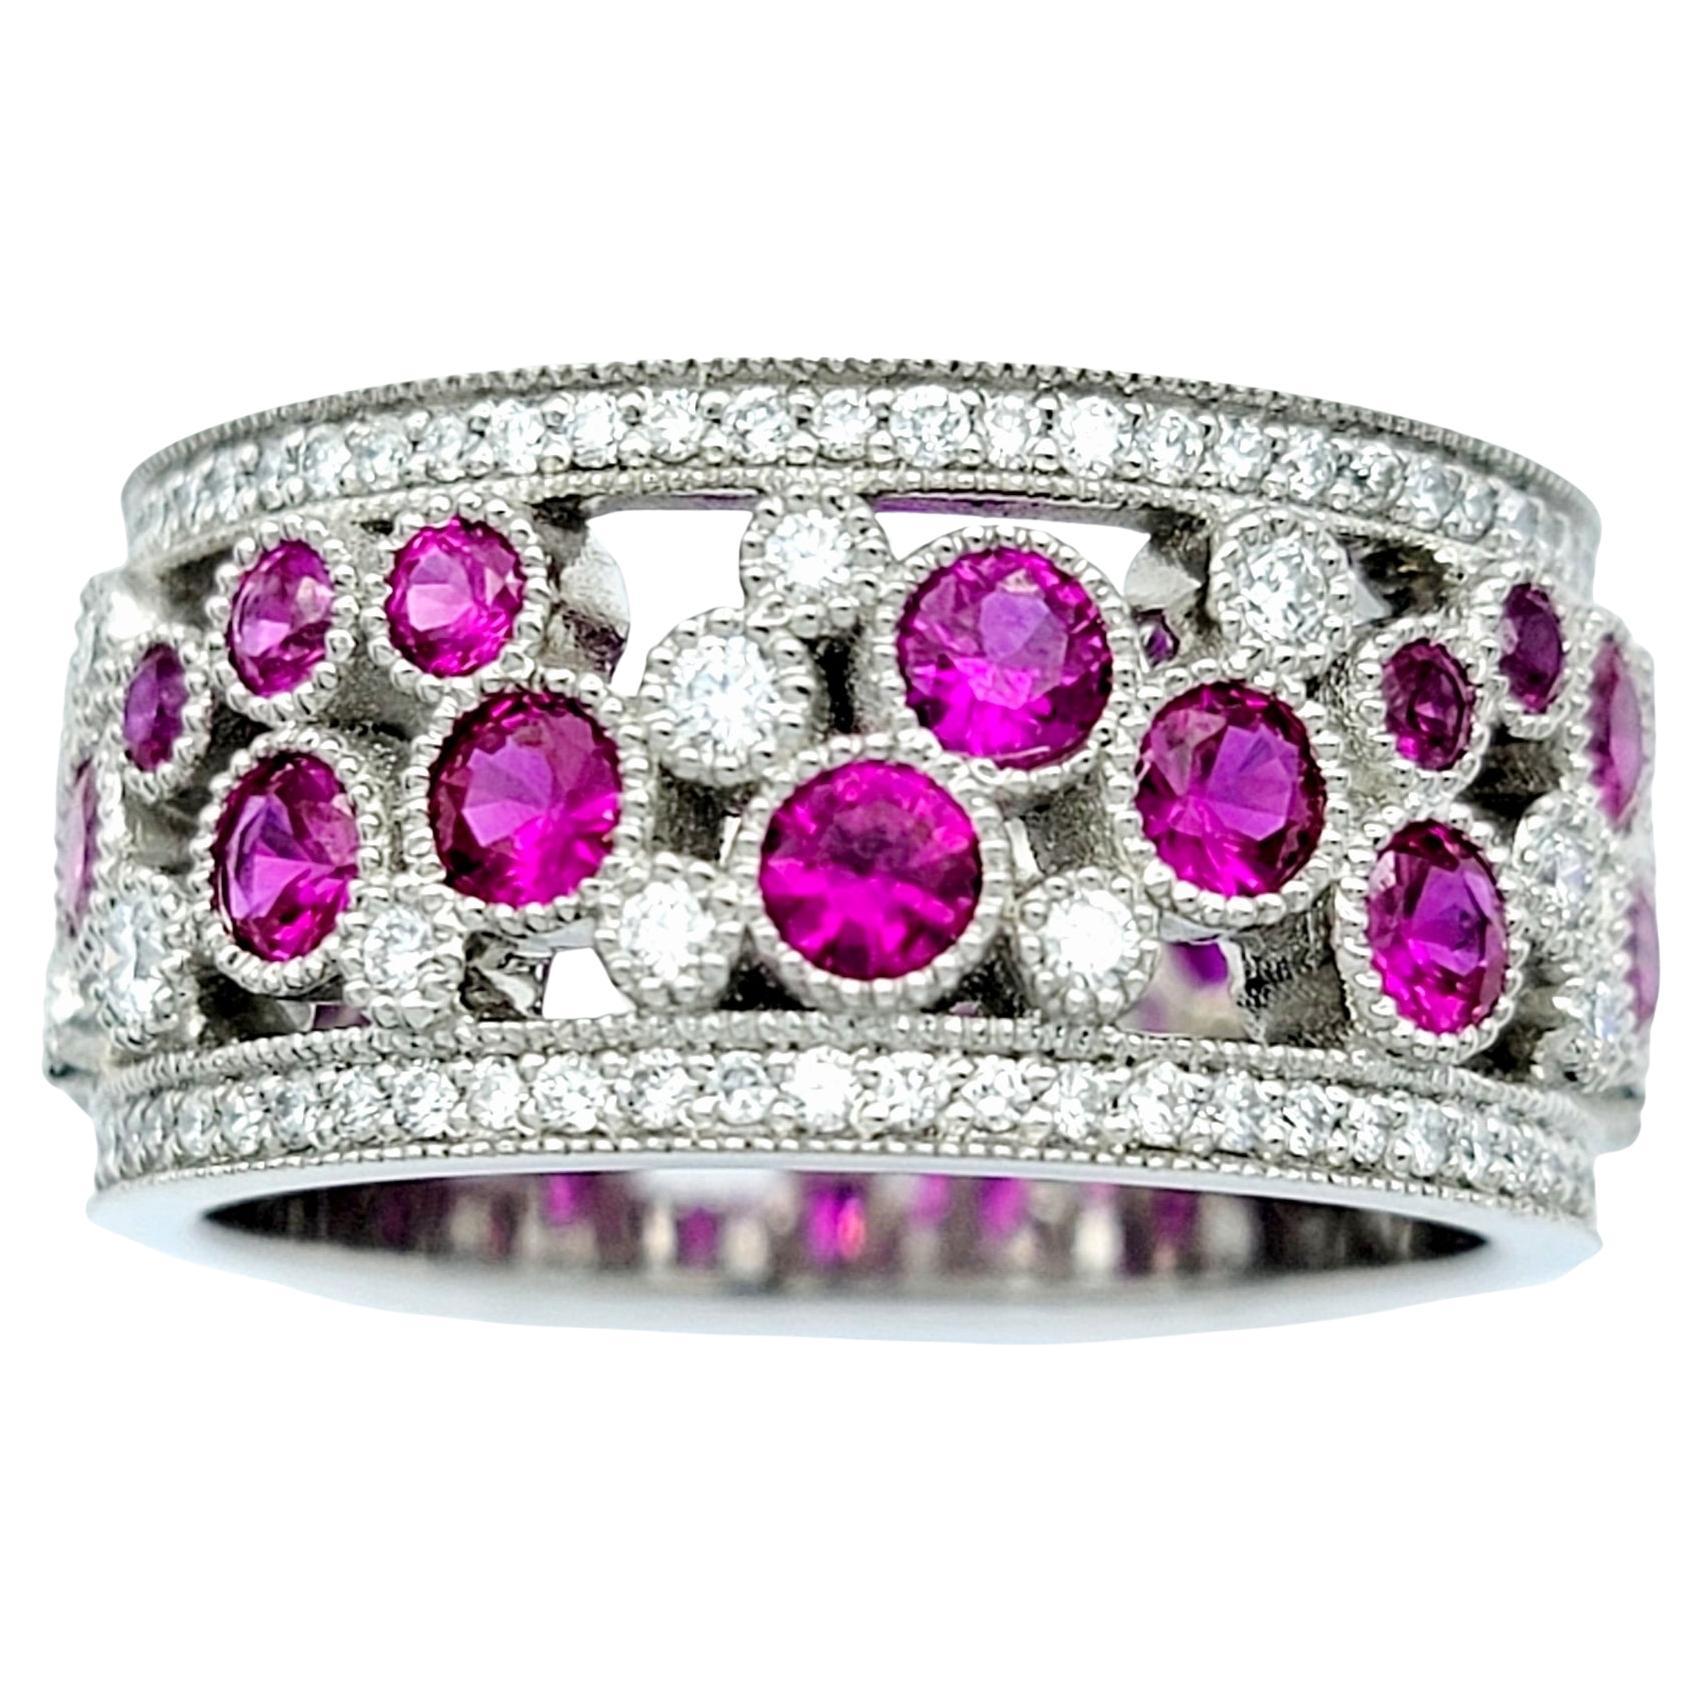 Size 6.75

Stunningly sparkly Cobblestone band ring from Tiffany & Co. This amazing piece is filled with  dazzling white diamonds and sparkling red rubies set in a playful path of cobblestones throughout the ring. You'll simply adore how these